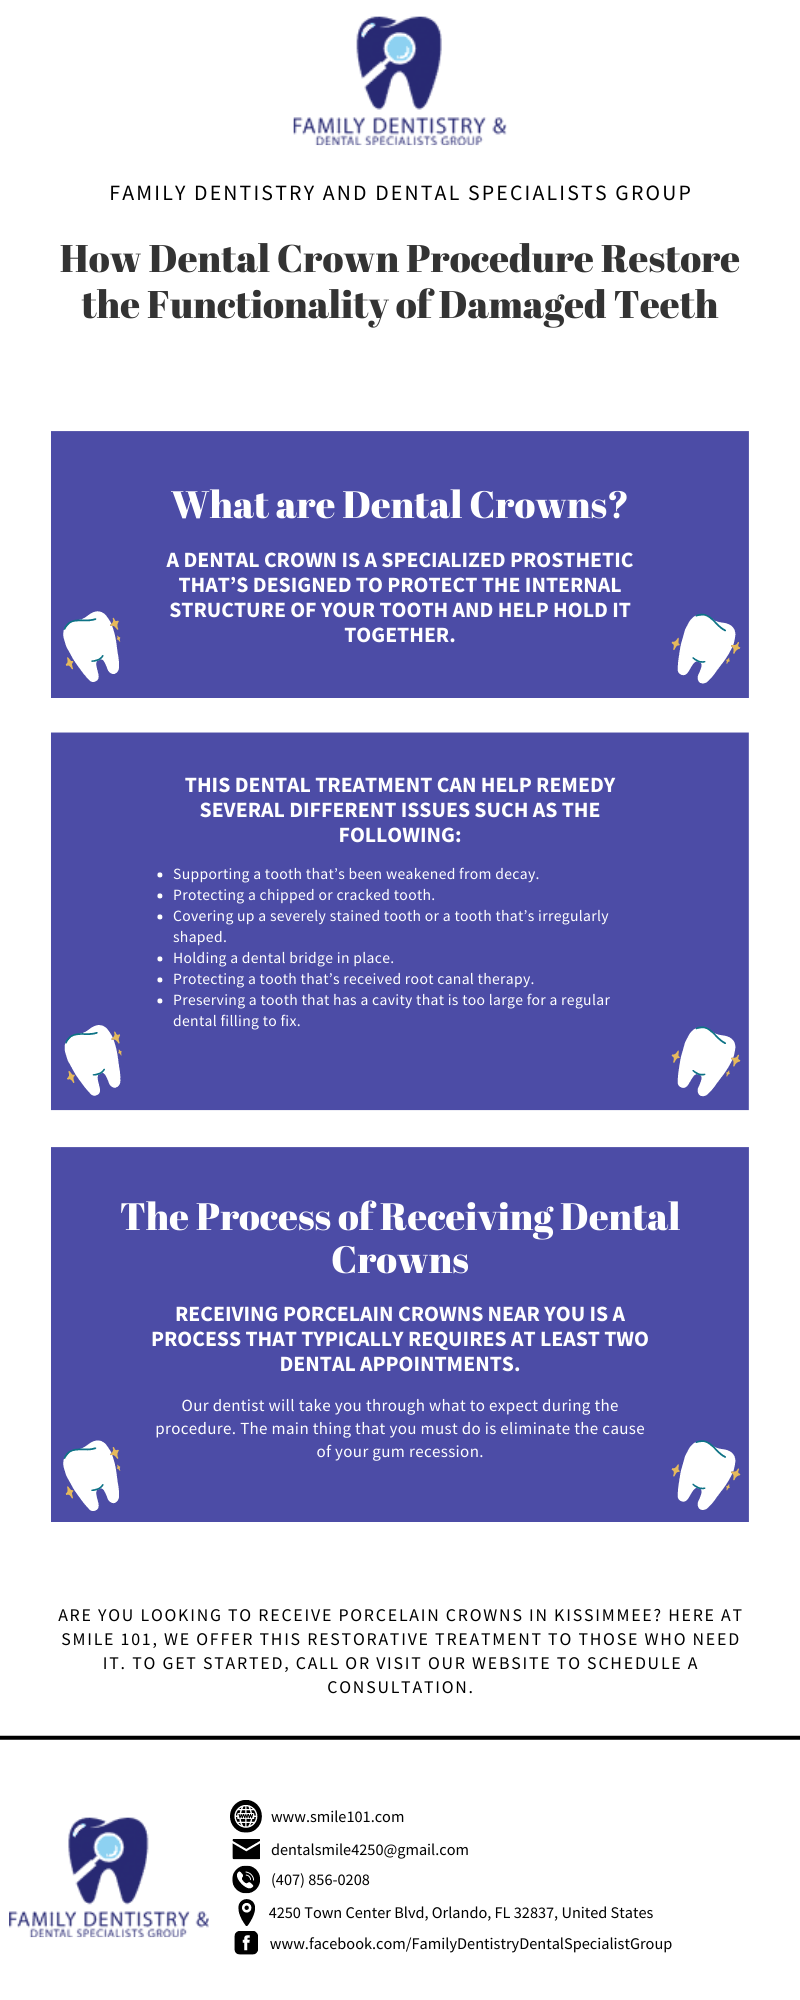 FAMILY DENTISTRY &
FAMILY DENTISTRY AND DENTAL SPECIALISTS GROUP

How Dental Crown Procedure Restore
the Functionality of Damaged Teeth

What are Dental Crowns?

A DENTAL CROWN IS A SPECIALIZED PROSTHETIC
THAT’S DESIGNED TO PROTECT THE INTERNAL

STRUCTURE OF YOUR TOOTH AND HELP HOLD IT
a Uda E

THIS DENTAL TREATMENT CAN HELP REMEDY
SEVERAL DIFFERENT ISSUES SUCH AS THE
FOLLOWING:

RCN TI

h that

oth that has

he Process of Receiving Dental
(OXY IT
RECEIVING PORCELAIN CROWNS NEARYOU ISA

PROCESS THAT TYPICALLY REQUIRES AT LEAST TWO
DENTAL APPOINTMENTS.

 

ARE YOU LOOKING TO RECEIVE PORCELAIN CROWNS IN KISSIMMEE? HERE AT
SMILE 101, WE OFFER THIS RESTORATIVE TREATMENT TO THOSE WHO NEED
IT. 10 STARTED, CALL OR VISIT QUR WEBSITE TO SCHEDULE A
CONSULTATION

 

 
  

® www smilel01 com

BE dentalsmiled250@gmal com

 

  

  

[<] 856.0208
FAMILY DENTISTRY & @ 4250 Town Center Bive, Orlanco, FL 12637, United States
Temas B ow tacevookc yDentistryDentalSpeciabstGroup